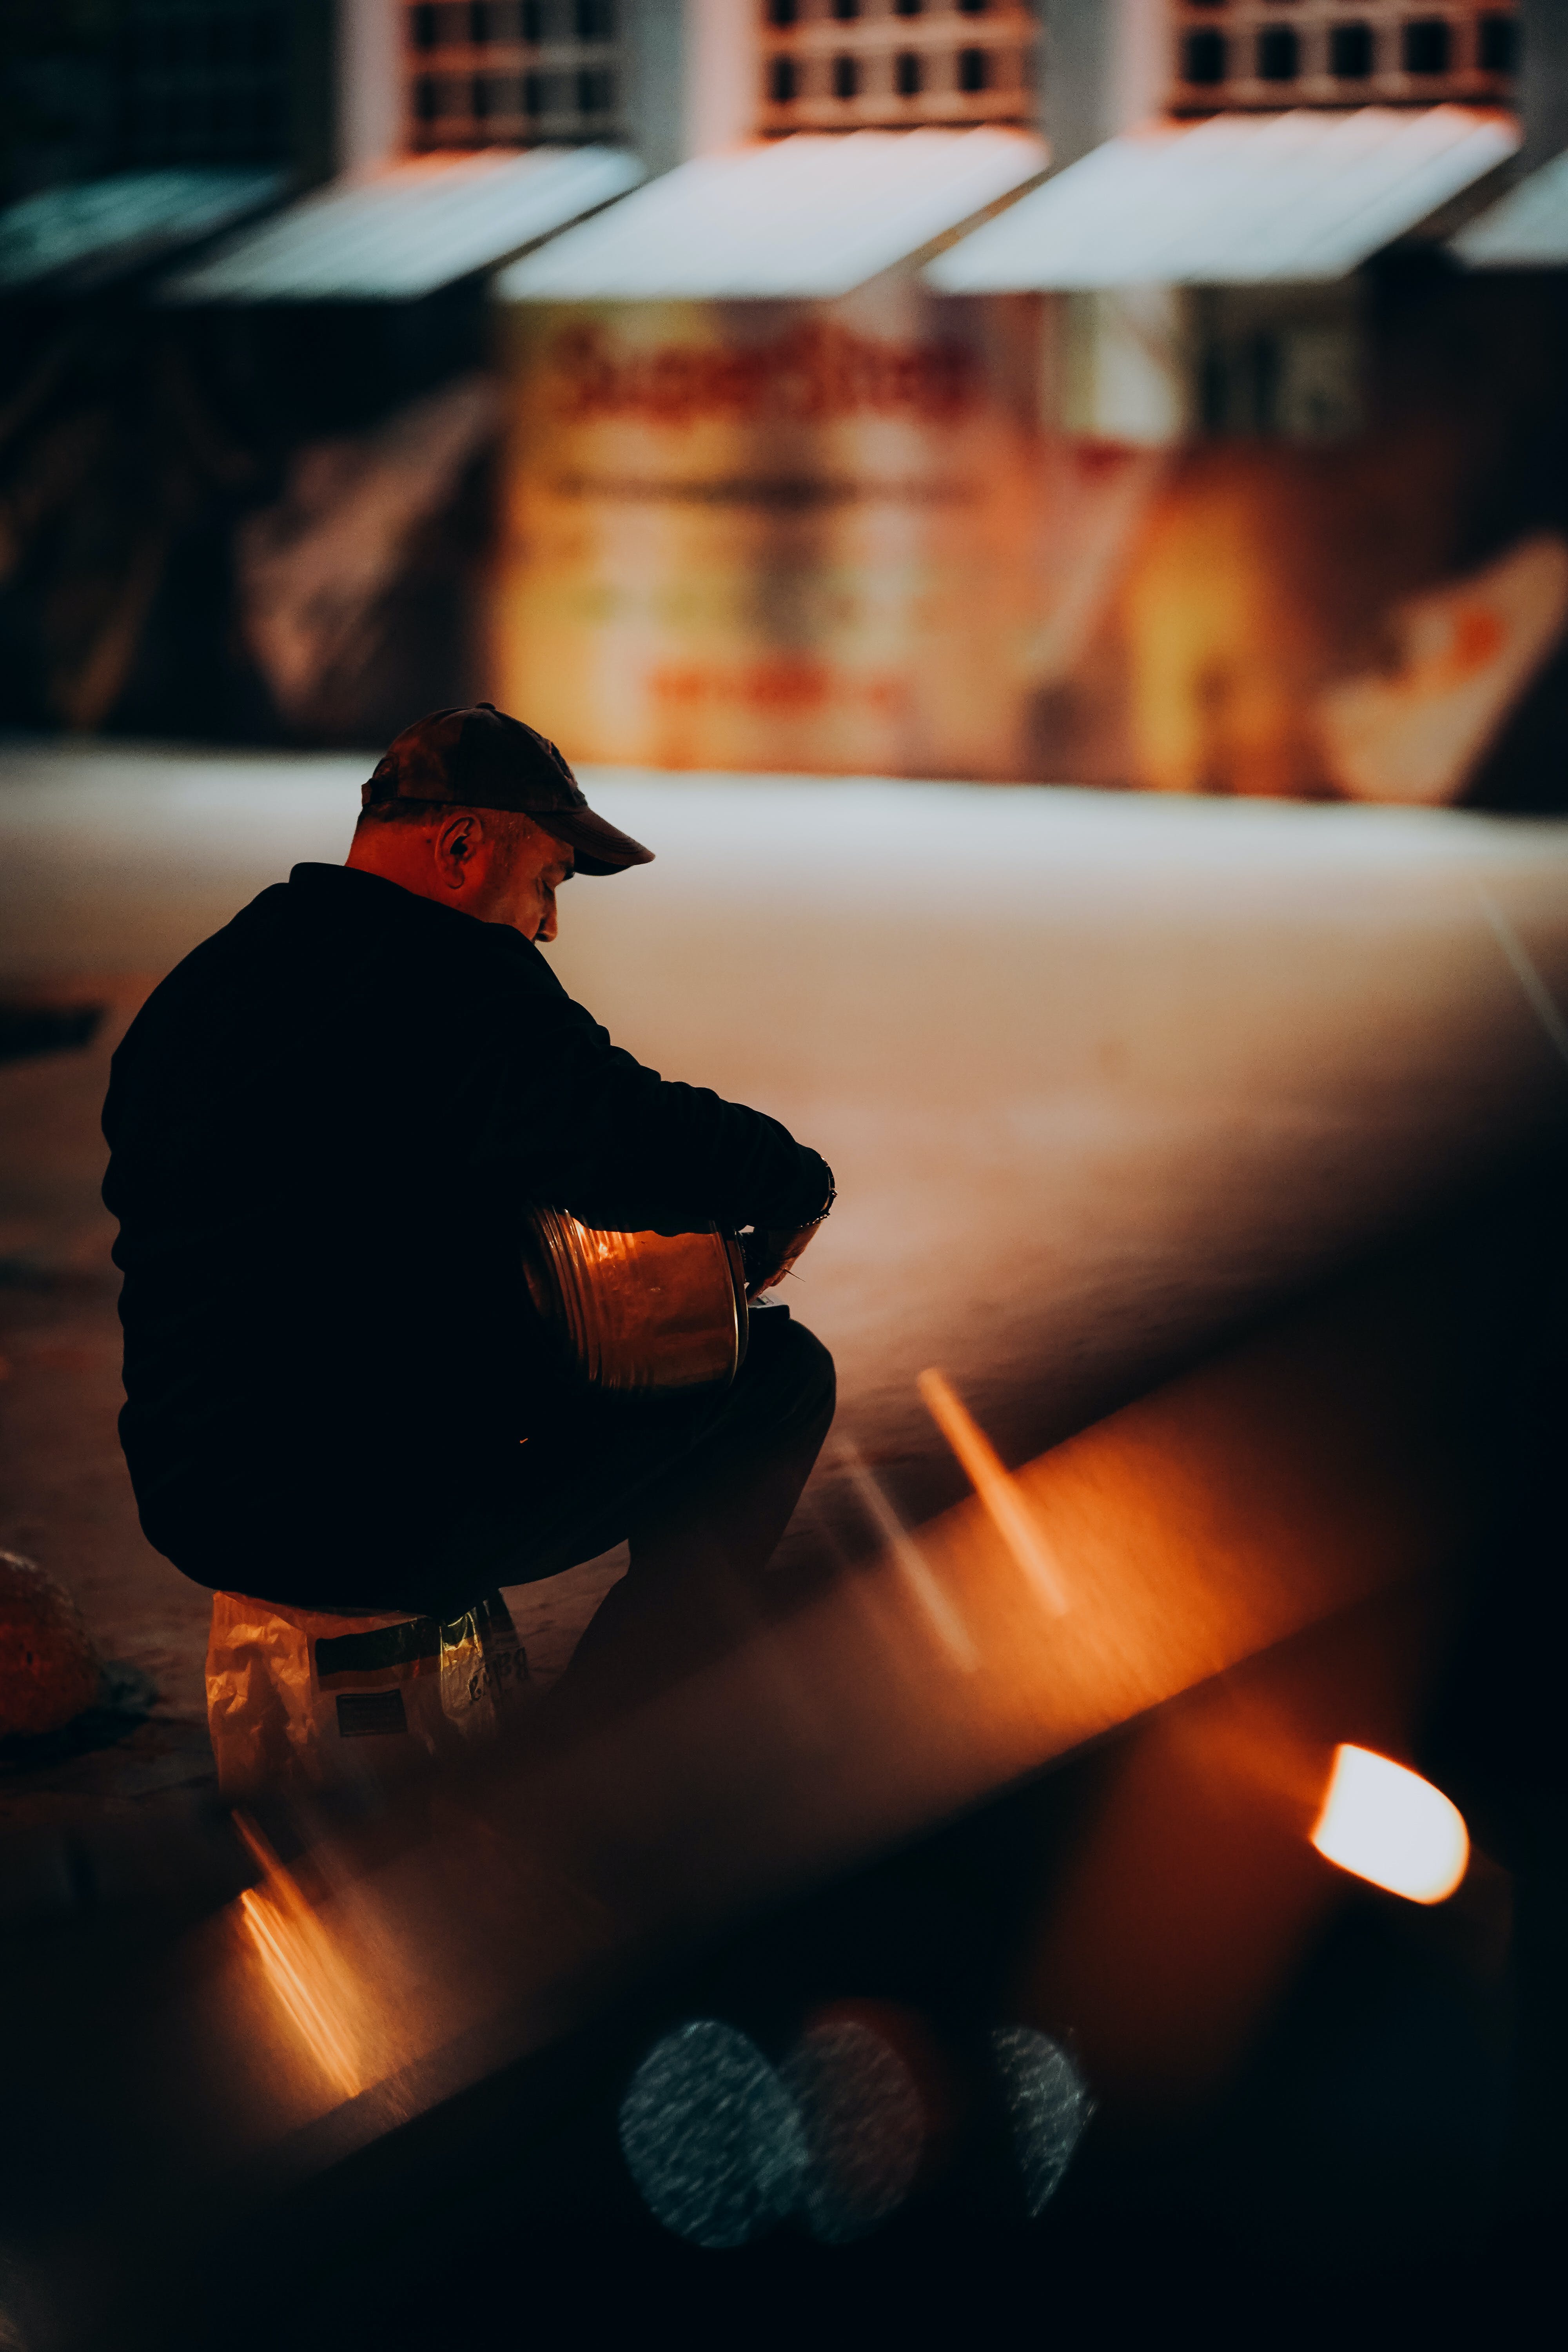 A man working with his hands outdoors | Source: Pexels